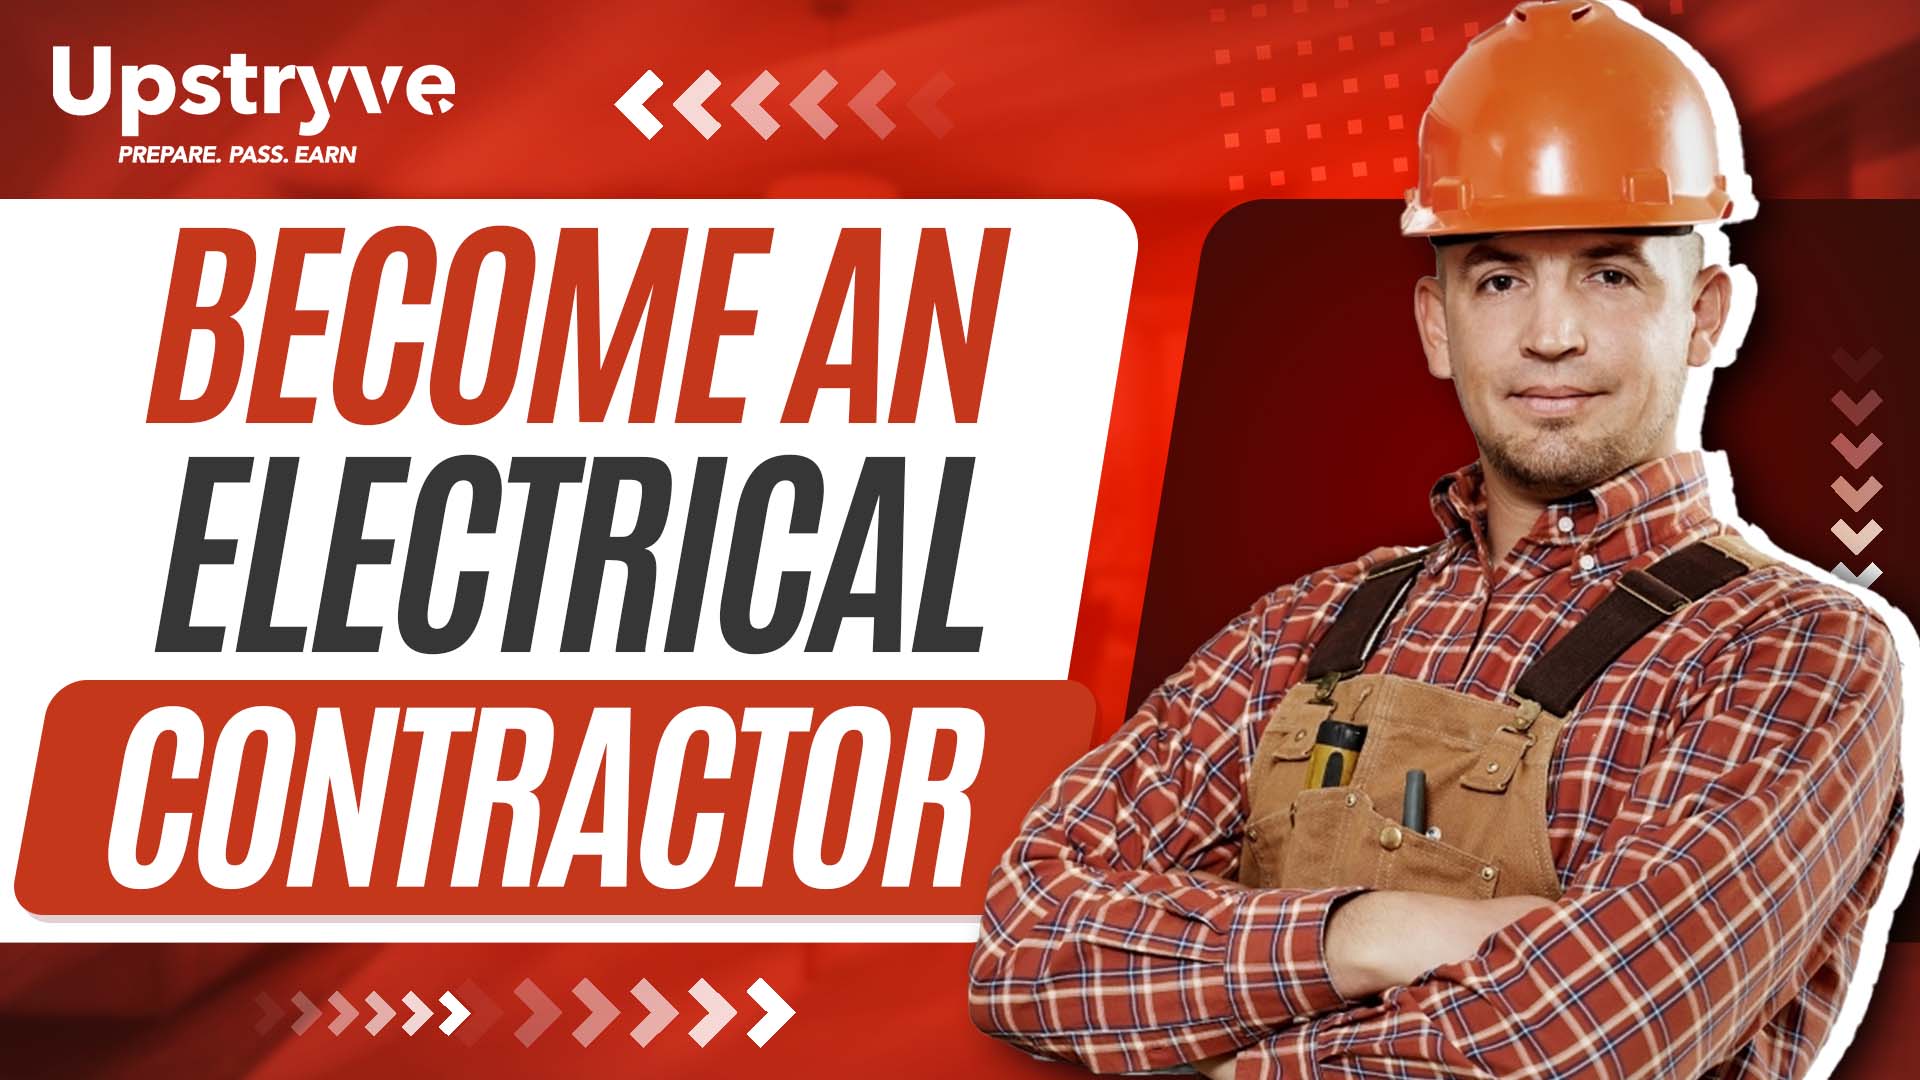 Call us today: 877-938-1888. How to become an Electrical Contractor in any state. Upstryve provides all the resources you need to successfully obtain your license. Read the description below for course agenda and materials.

BOOK A TUTOR: https://www.upstryve.com or call 877-938-1888
Need more help with your trade exam prep? Click here and match with one of our experts 👉 https://upstryve.com/pages/by-trade